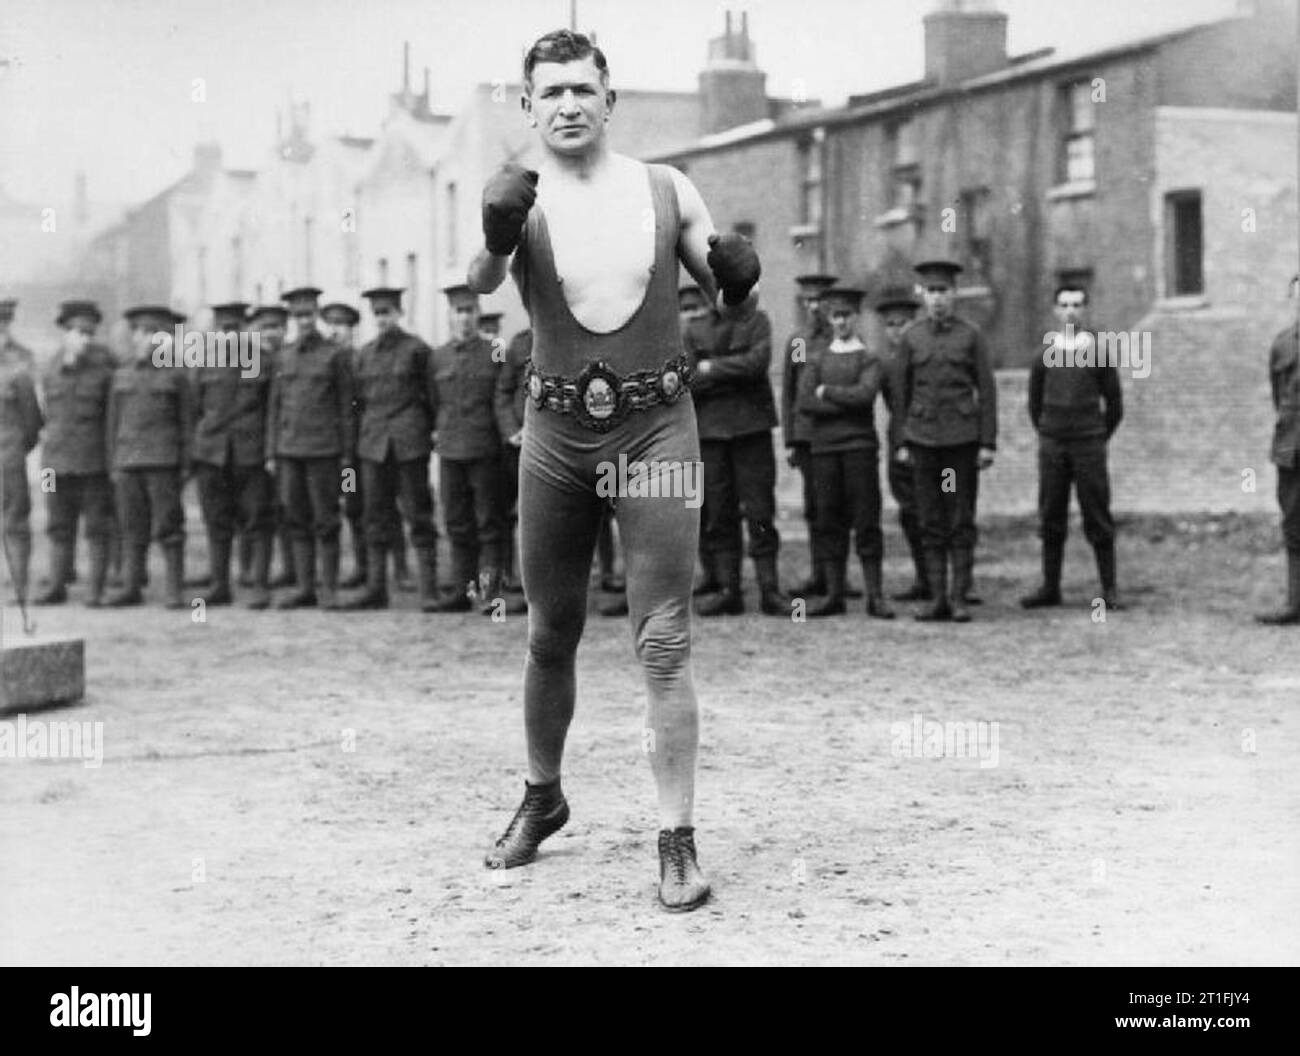 . Instructor, Boxing Platoon L/Cpl O'Keefe, English Middle Weight Boxing Champion and holder of the Lonsdale Belt, assisting with training men of 1 Battalion, Surrey Rifles at Camberwell. O'Keefe was born in London in 1883 and began his boxing career in 1906. Between 1907 and 1911, he pursued his boxing career in Australia. In May 1914, he won the Middle Weight Title by defeating Jim Sullivan. During the war, he served as a Physical Training Instructor but also won several bouts. In 1915, he knocked out Bandsman Jack Blake in Round 13 and defeated Jim Sullivan again in 1916. In a return match Stock Photo